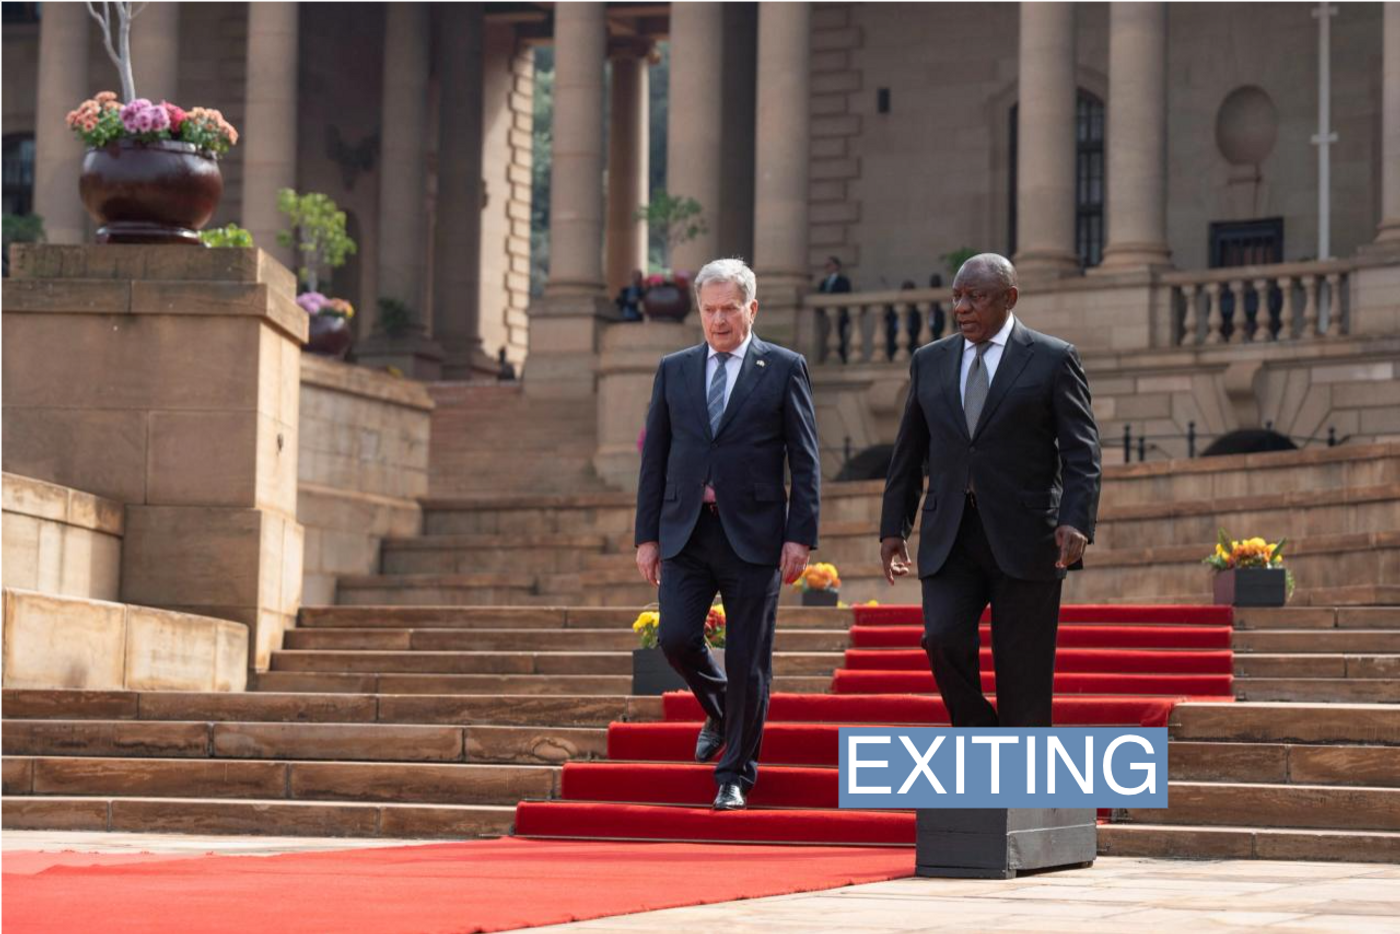 South African President Cyril Ramaphosa walks with Finland's President Sauli Niinisto during the welcoming ceremony for the official state visit at the Union Buildings in Pretoria, South Africa, April 25, 2023 REUTERS/Ihsaan Haffejee